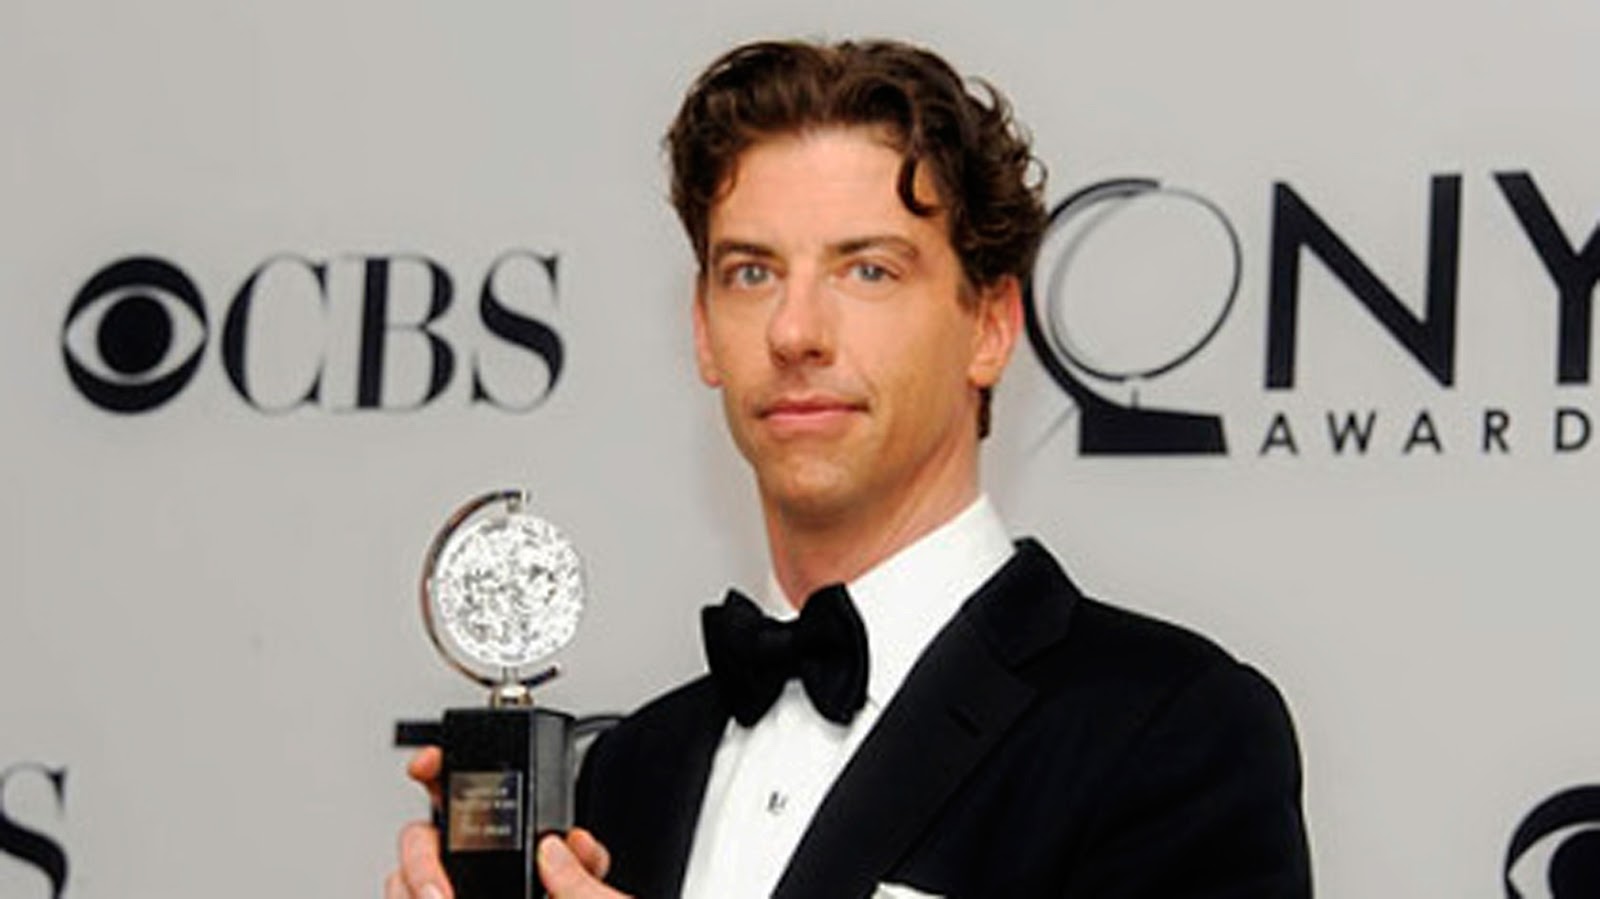 Masters of Sex - Season 2 - Christian Borle gets recurring role